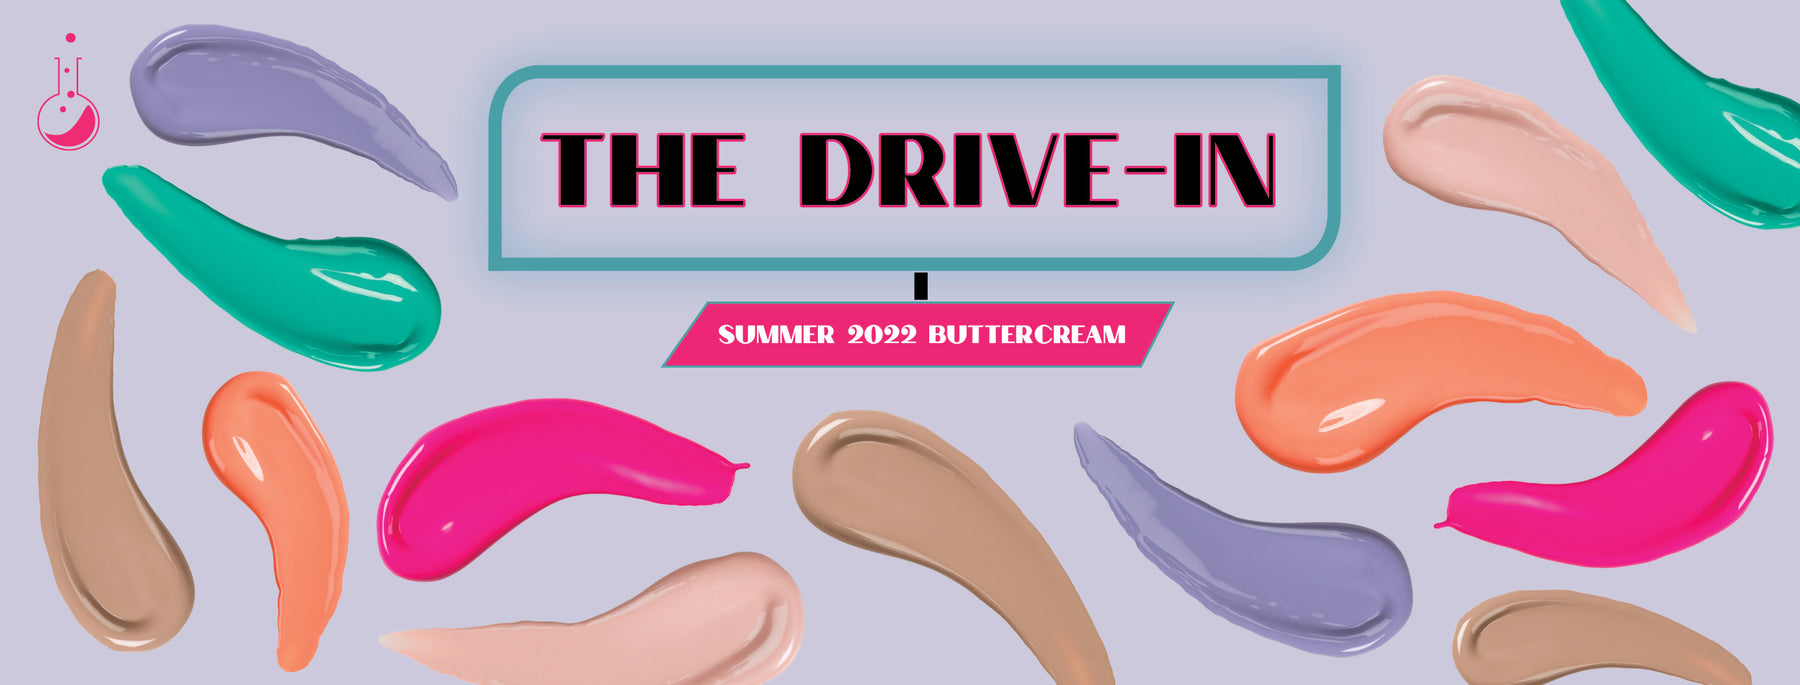 NEW Drive-In Summer 2022 ButterCream Collection by Light Elegance